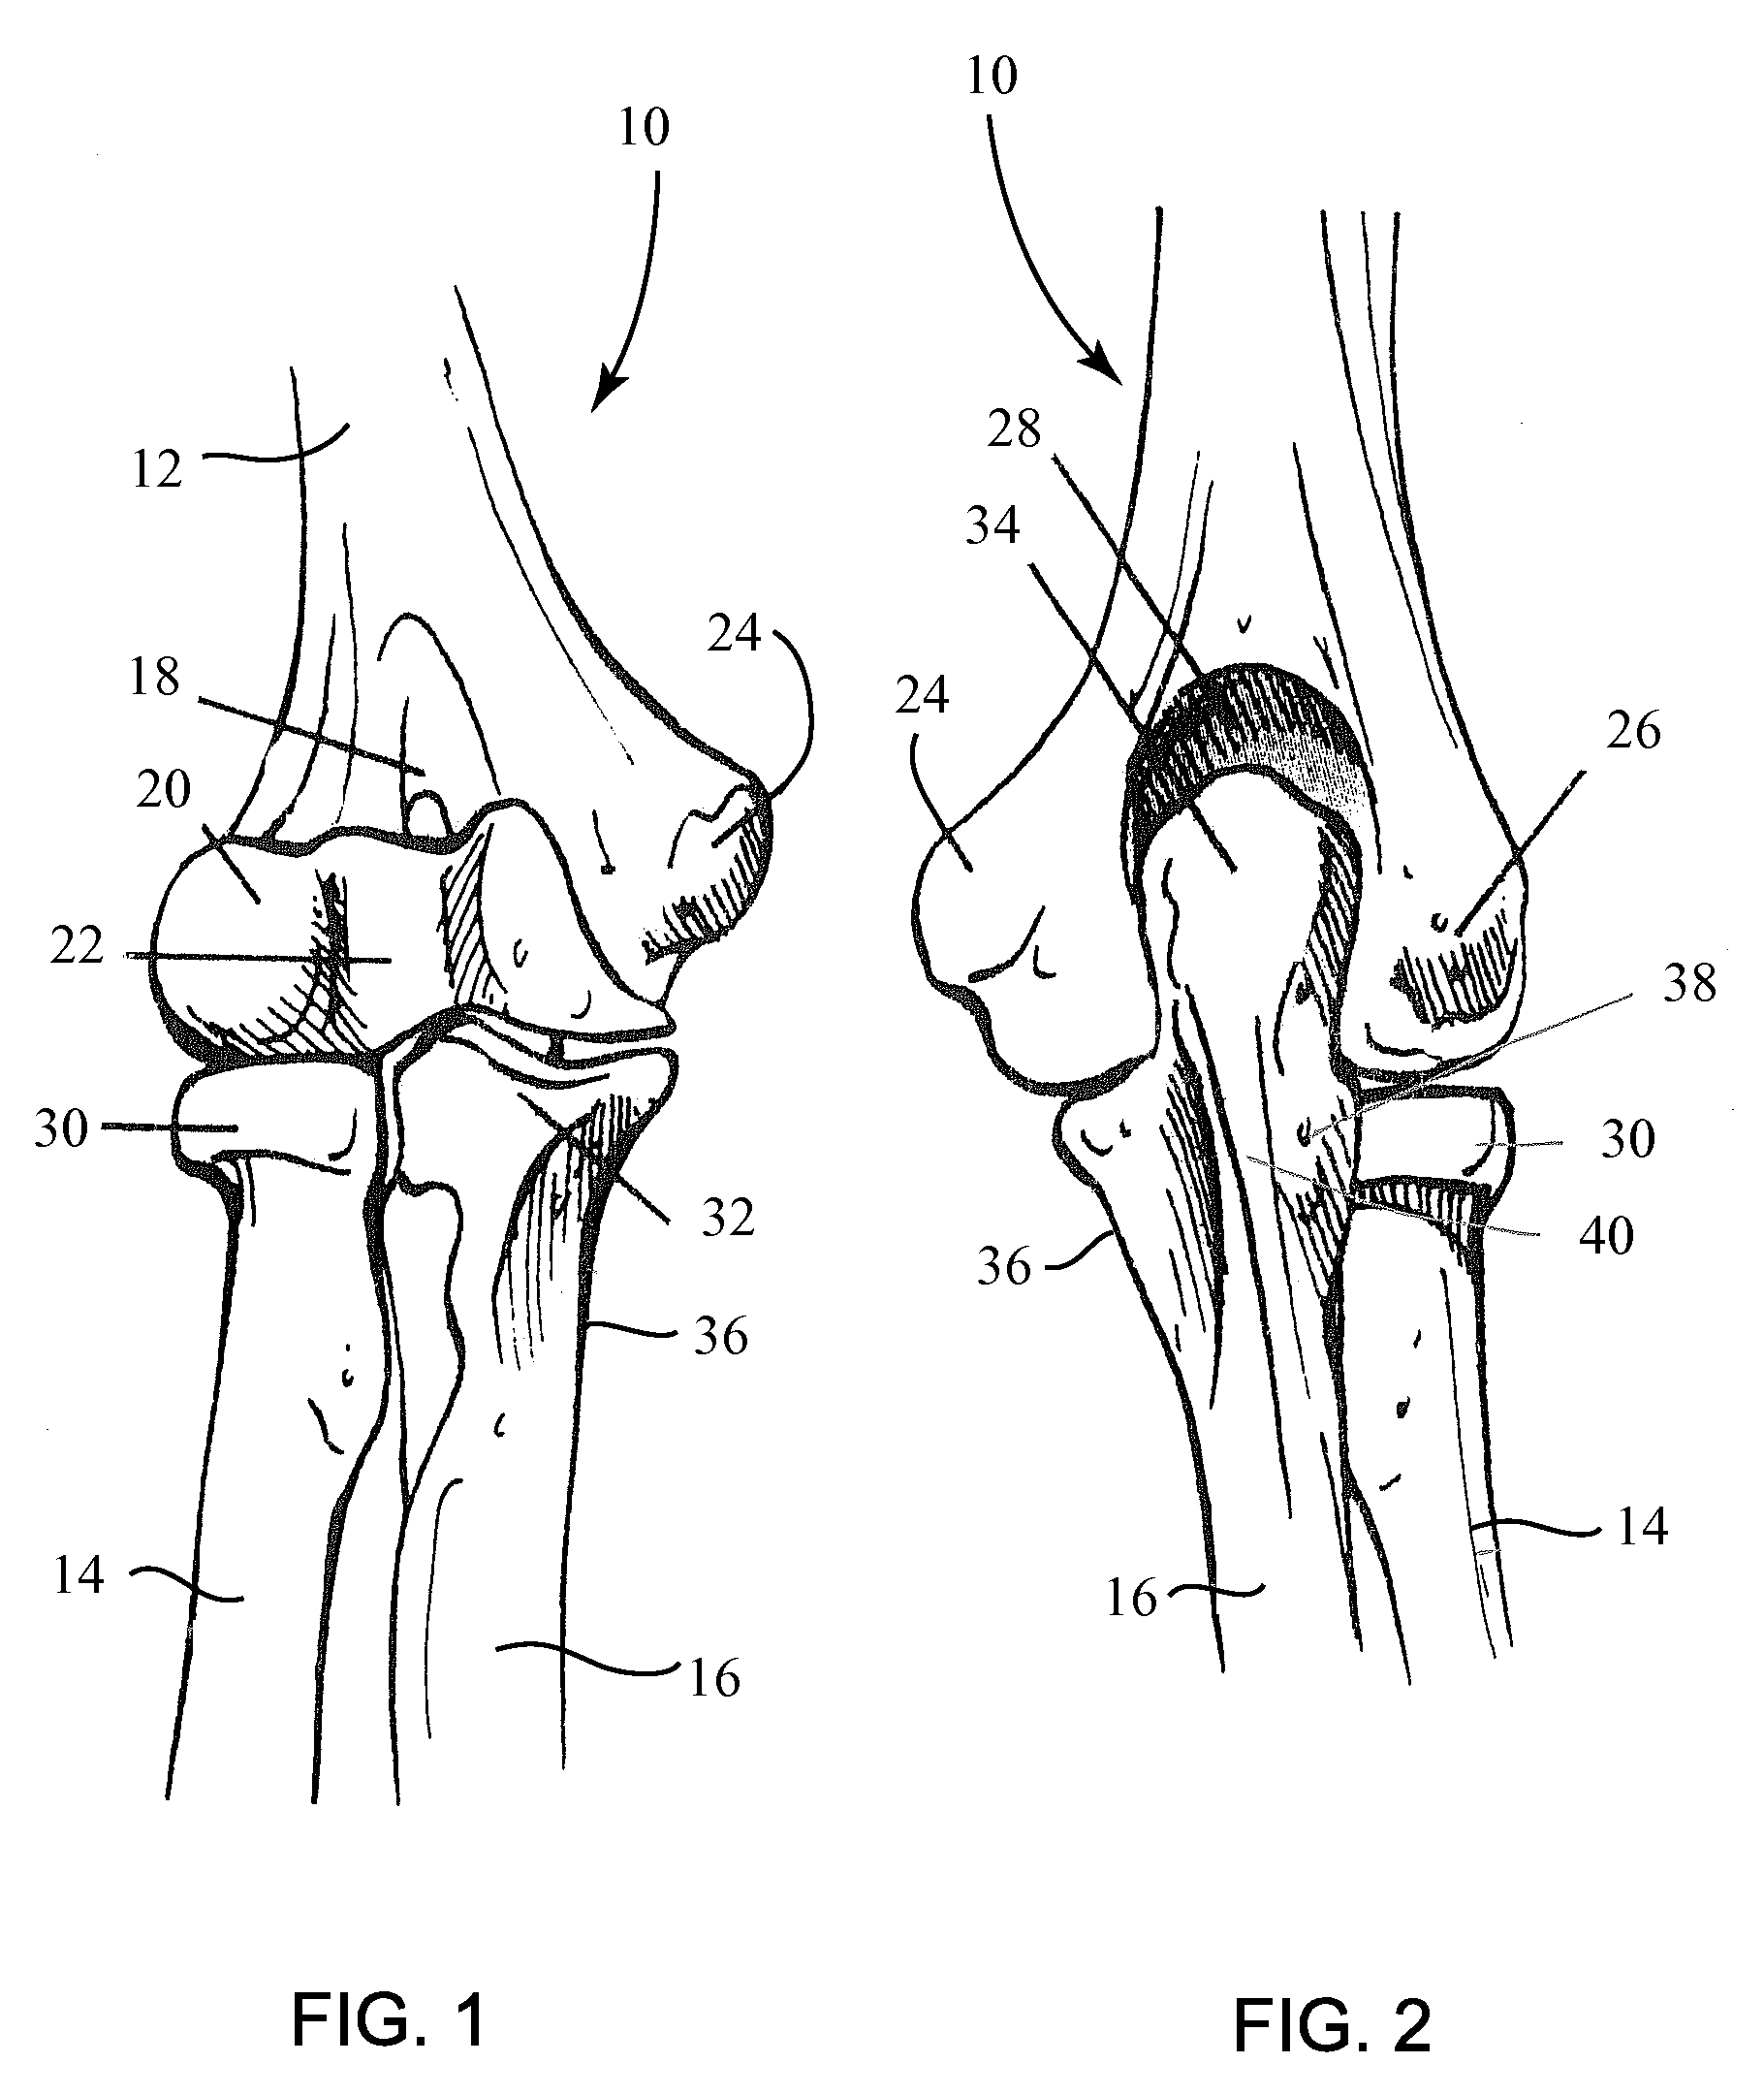 Fracture Fixation Plate for the Olecranon of the Proximal Ulna